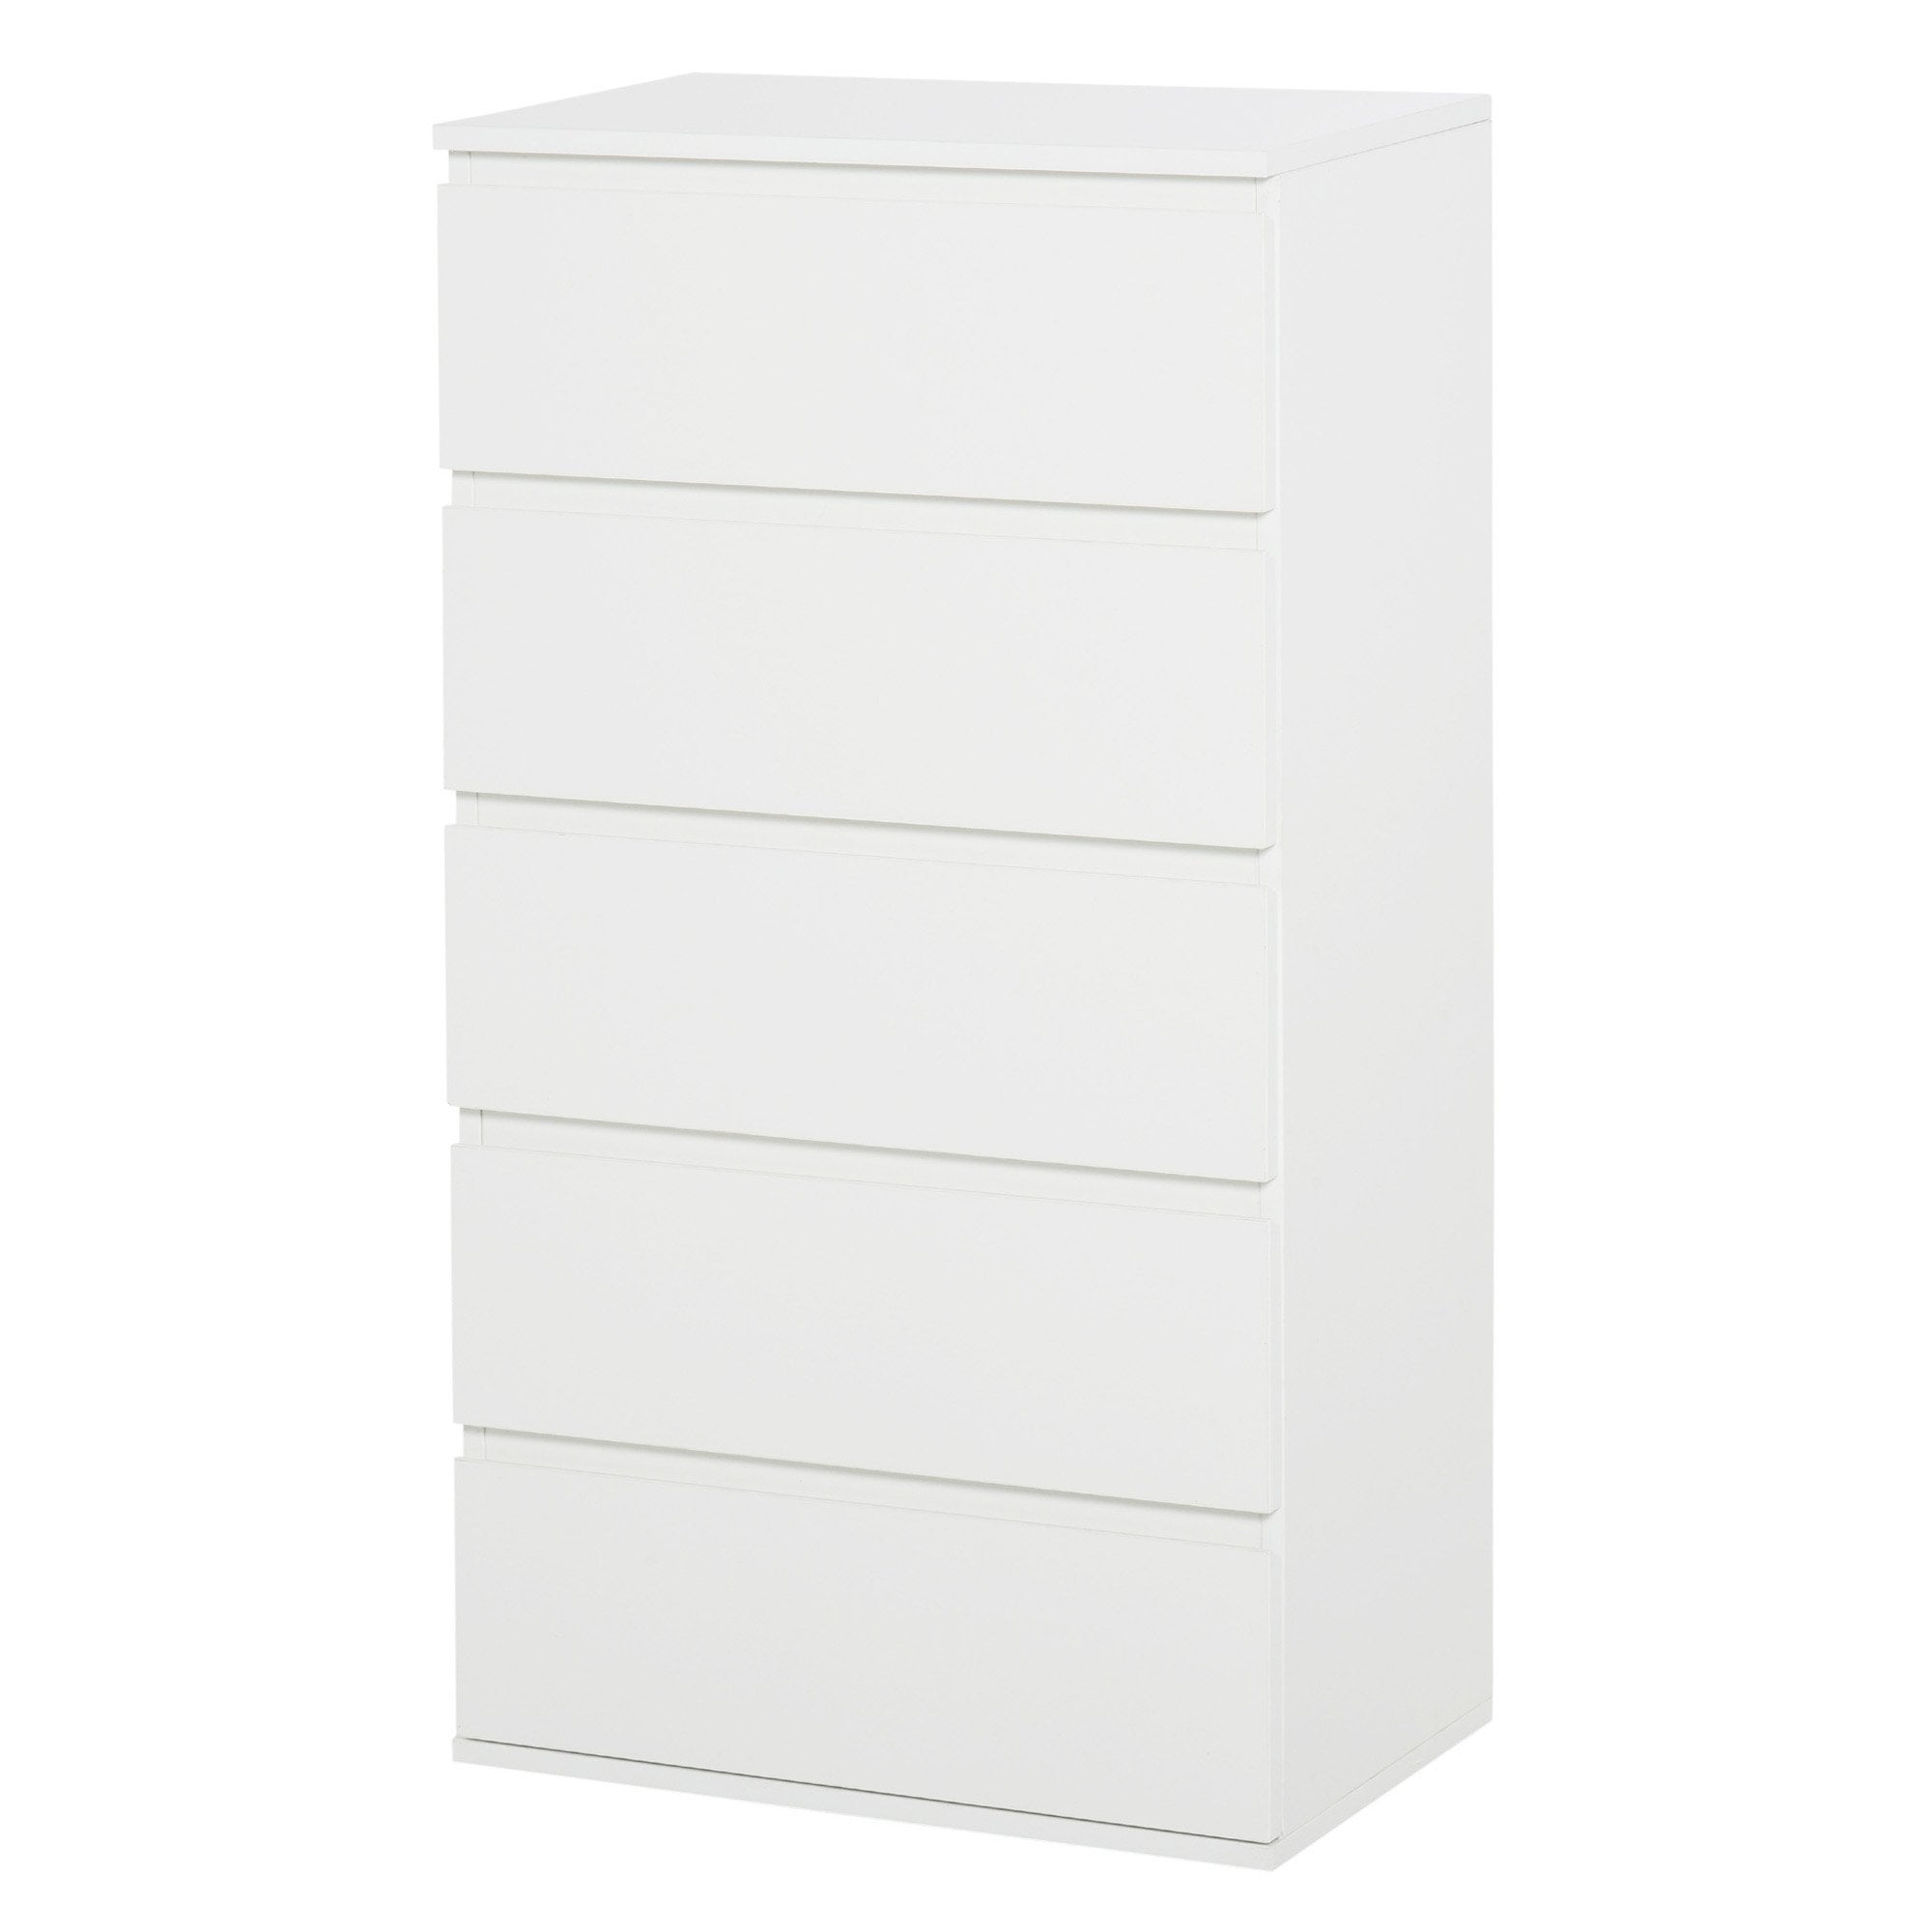 HOMCOM Chest of Drawers - 5 Drawers Storage Cabinet Floor Tower Cupboard for Bedroom Living Room - White  | TJ Hughes